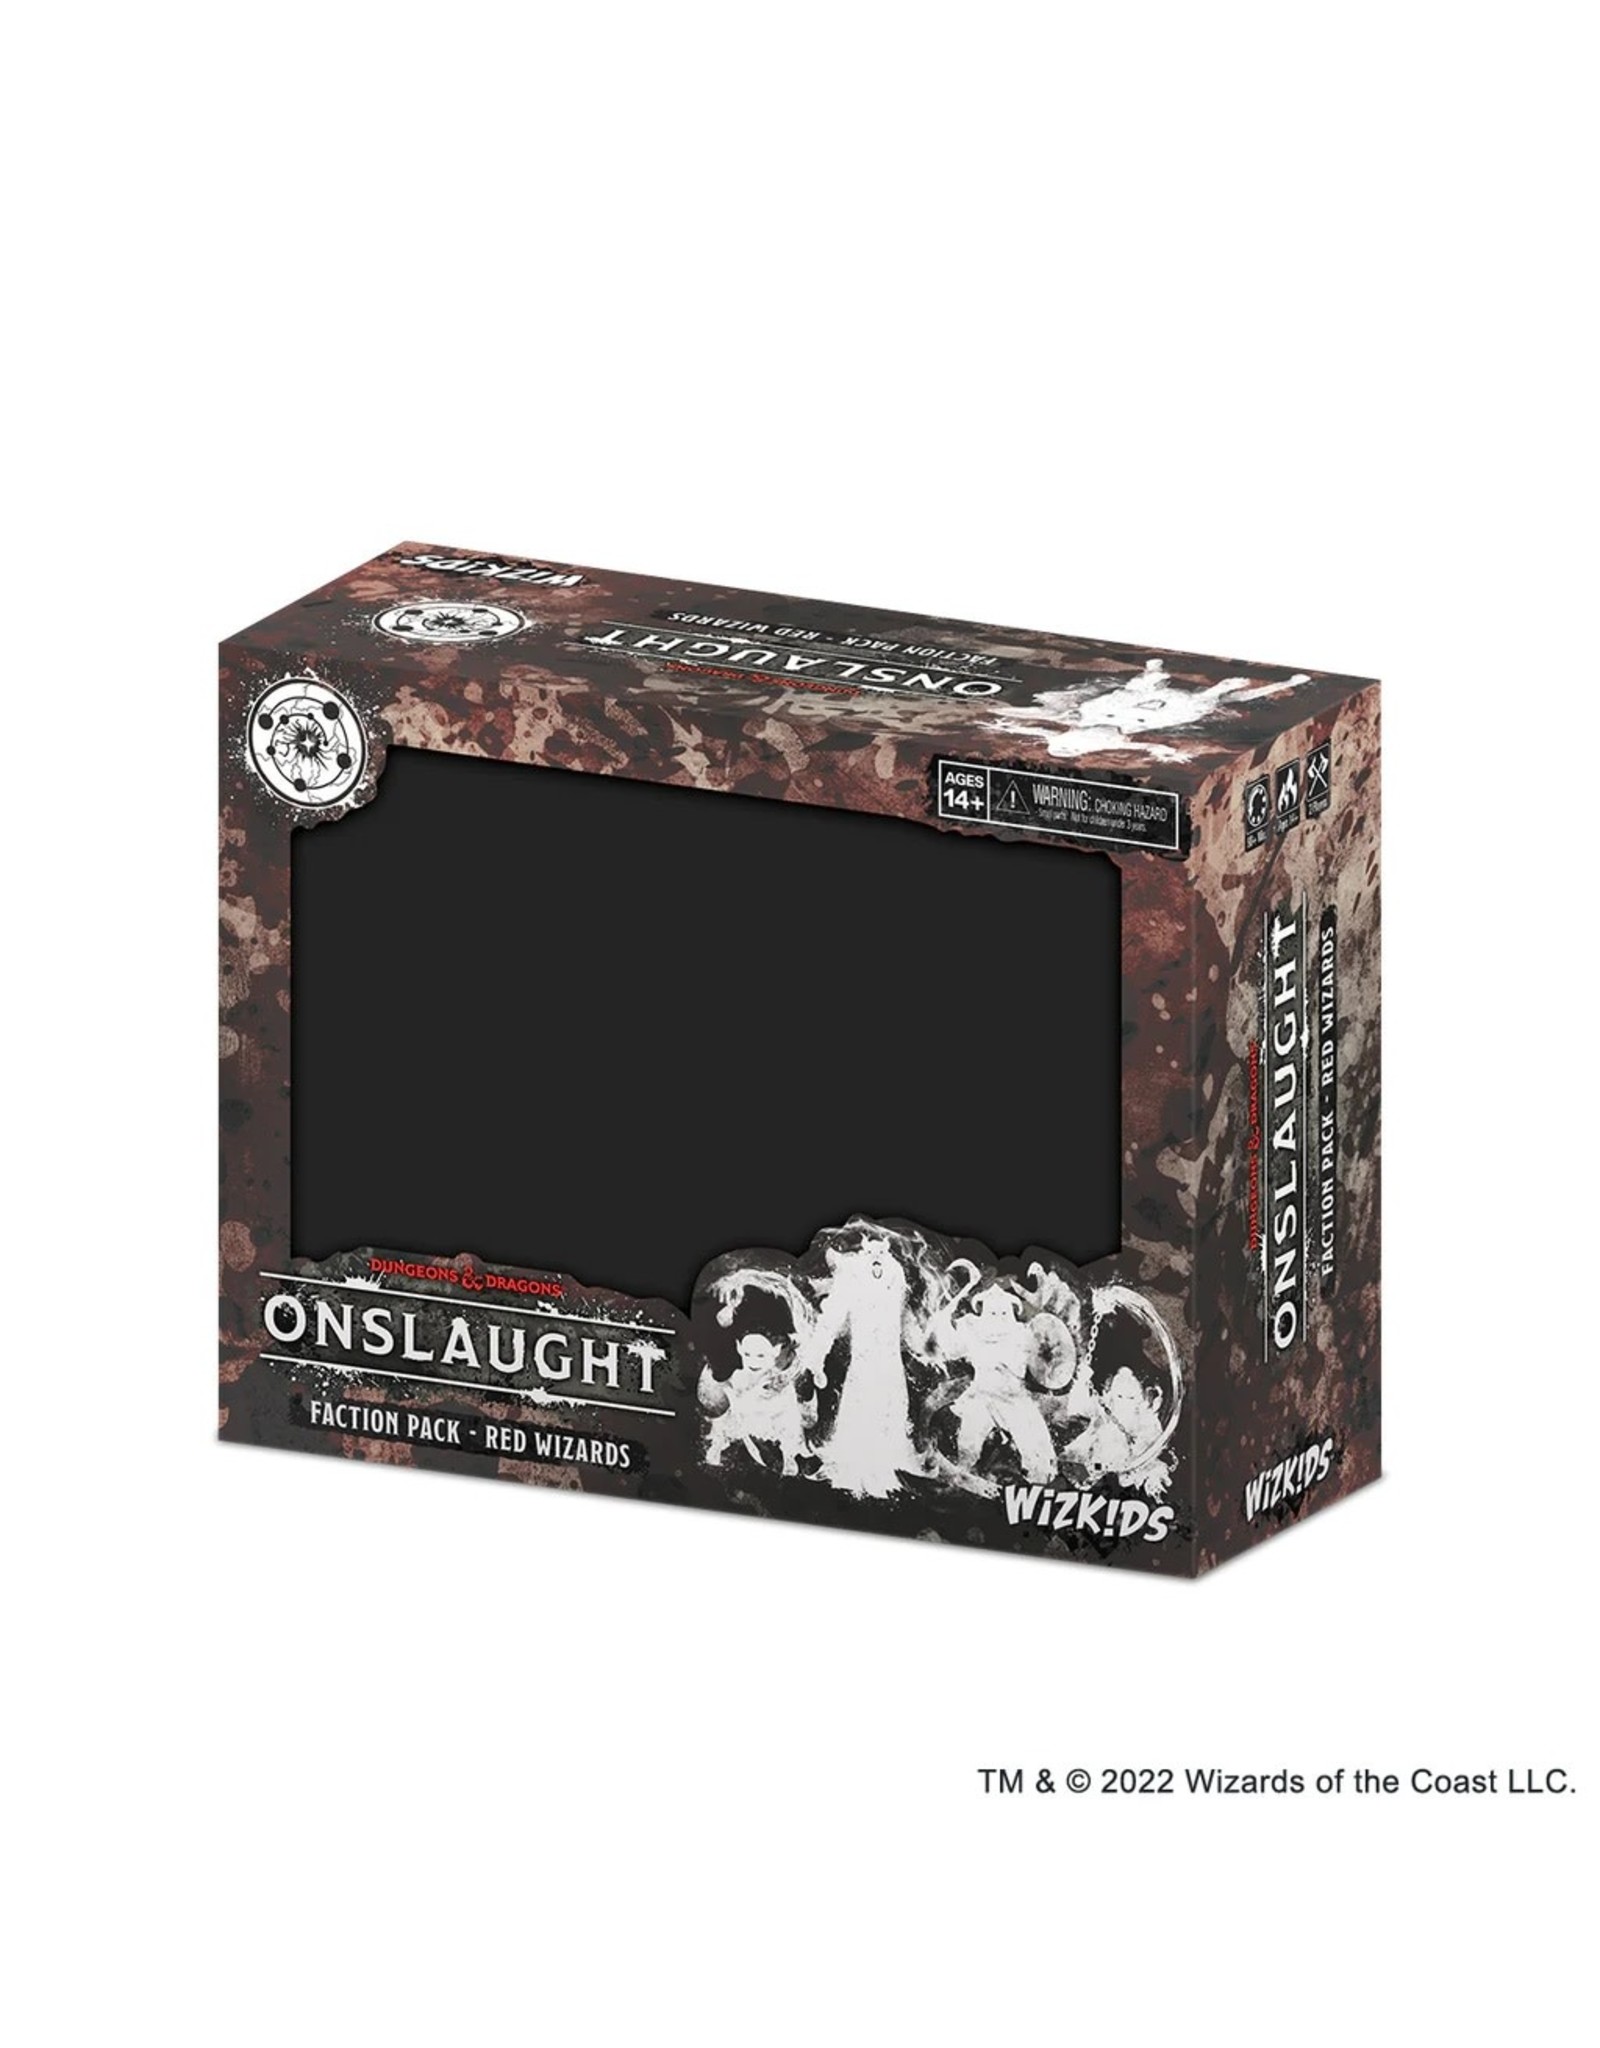 Wizards of the Coast D&D: Onslaught- Red Wizards Faction Pack